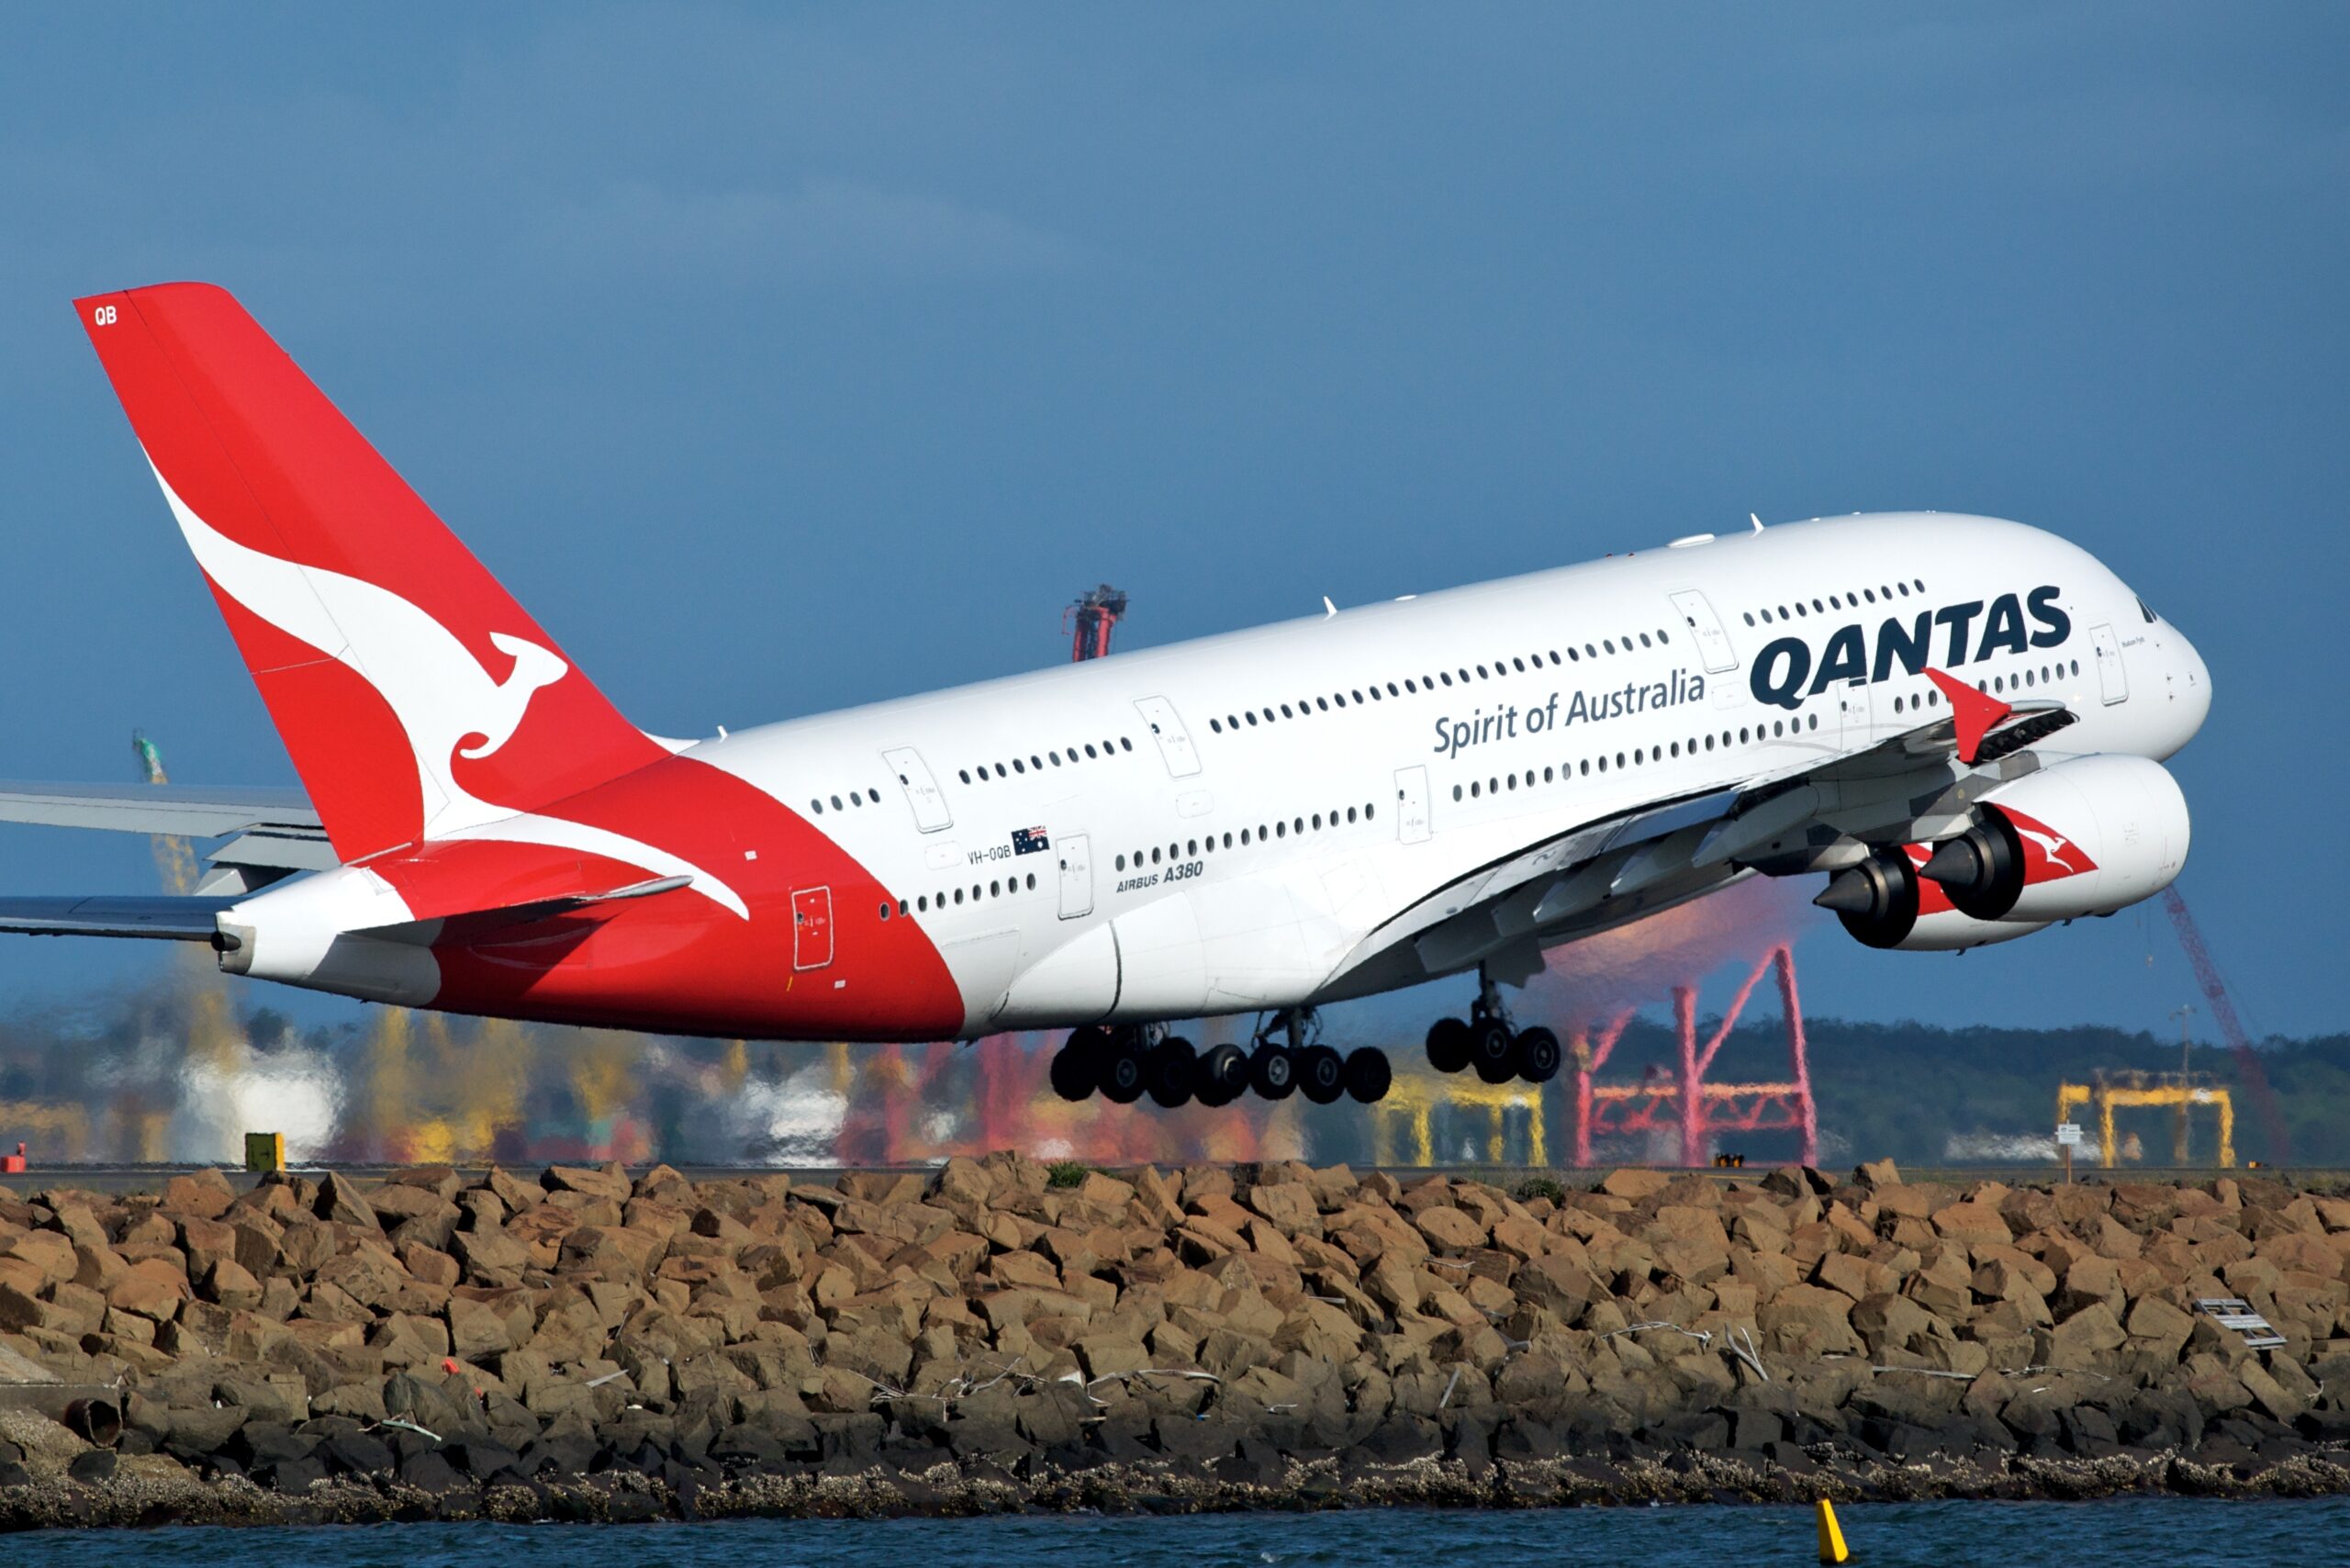 Qantas flight from Auckland to Sydney issues mayday due to engine troubles